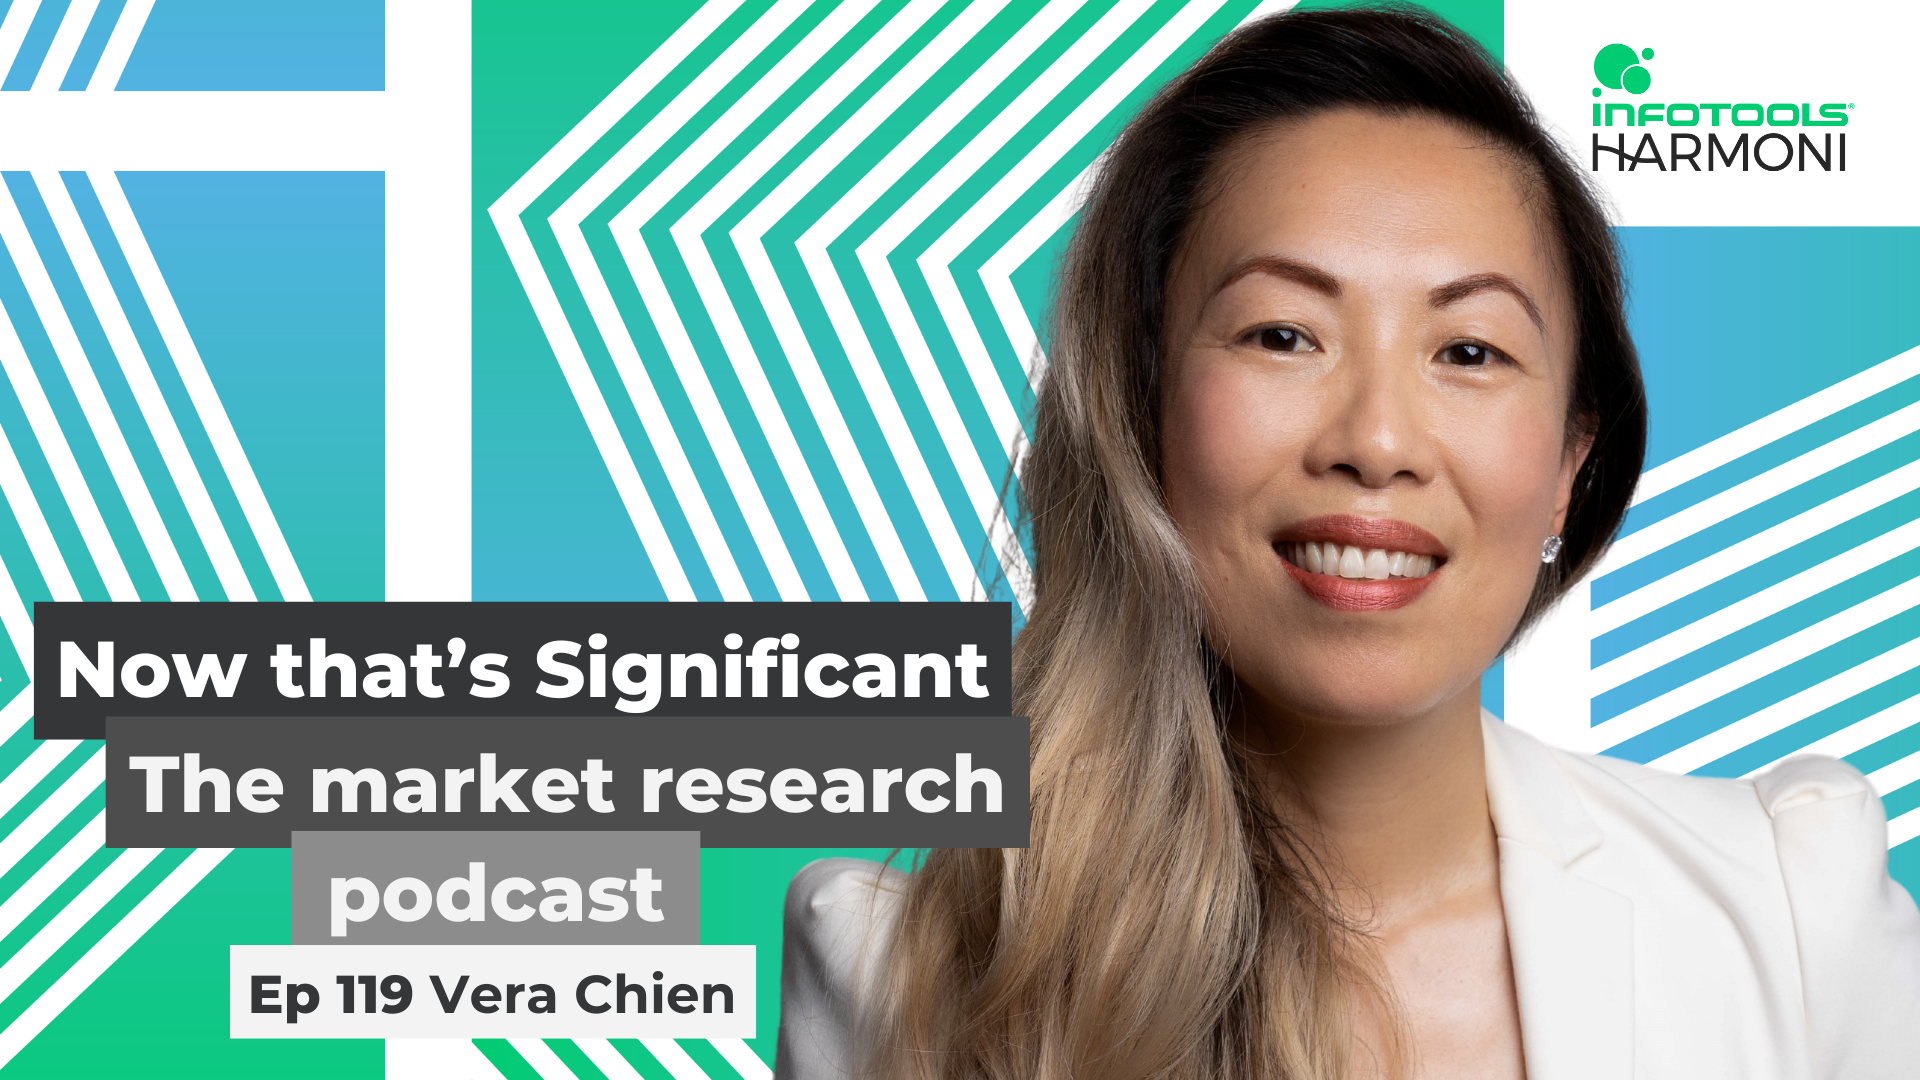 Infotools' Now that's Significant podcast - Michael Howard and Vera Chien delve into the fascinating world of consumer insights, exploring how research shapes content creation and strategy at Warner Bros. Discovery.